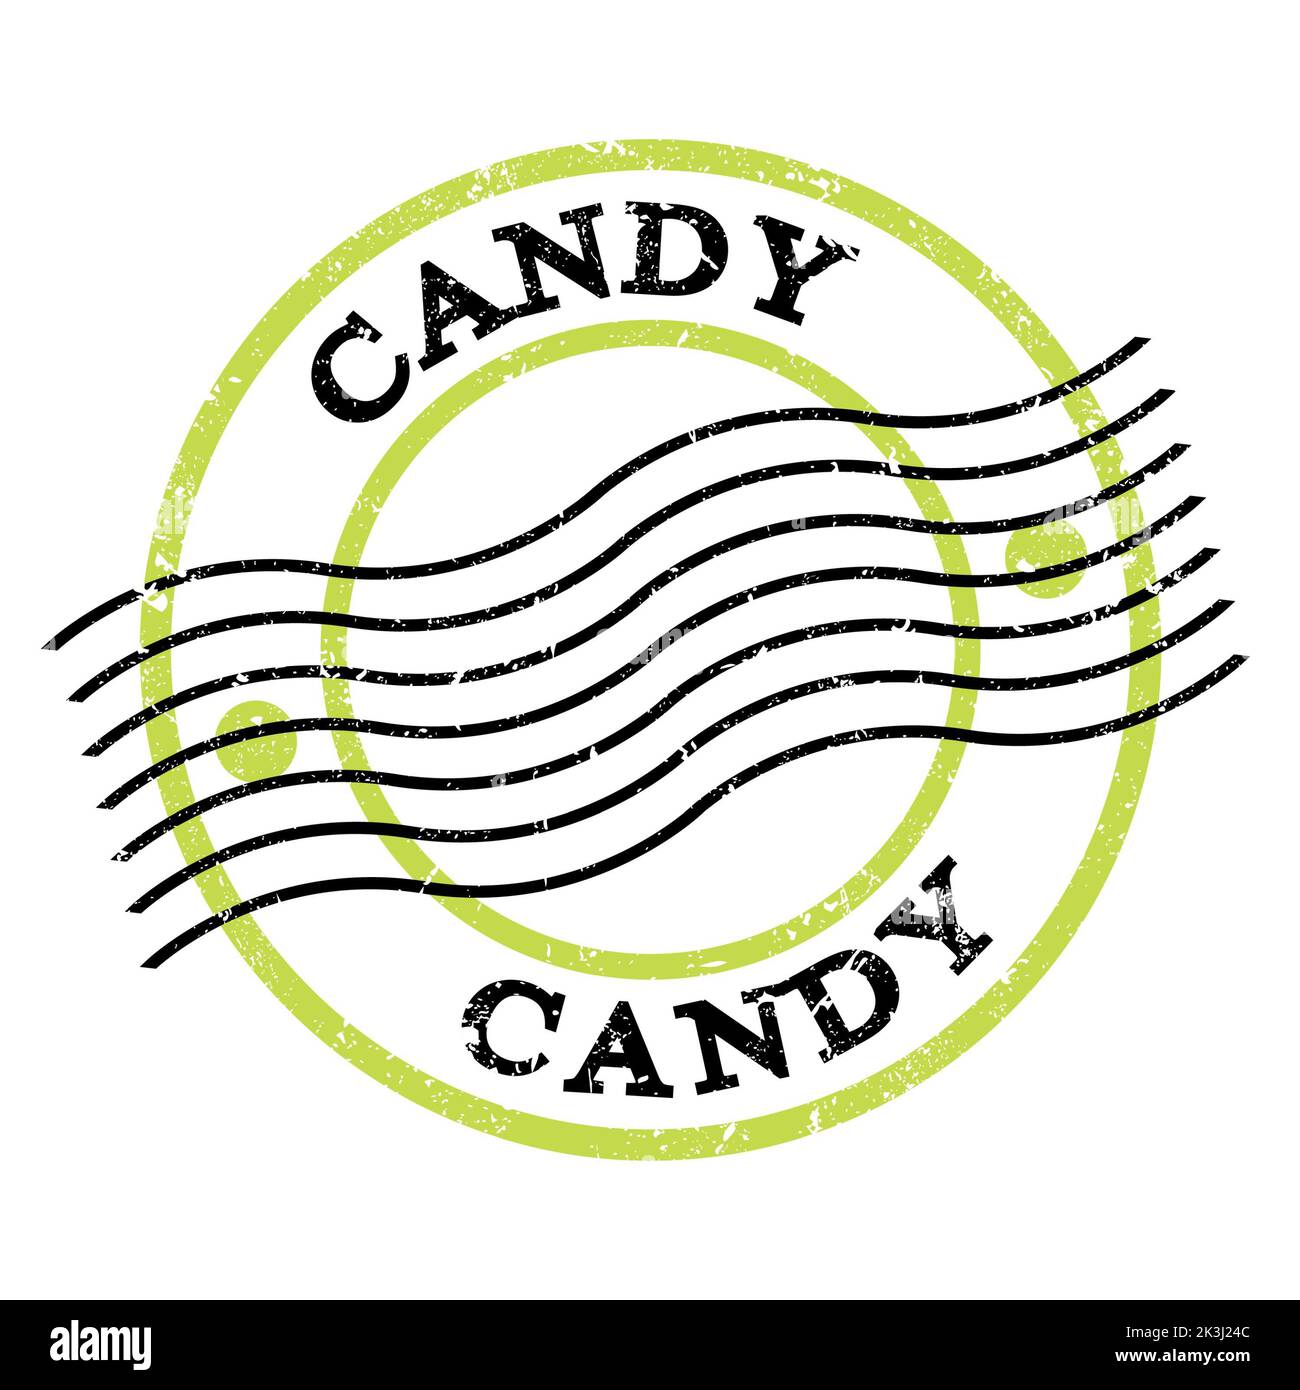 CANDY, text written on green-black grungy postal stamp. Stock Photo